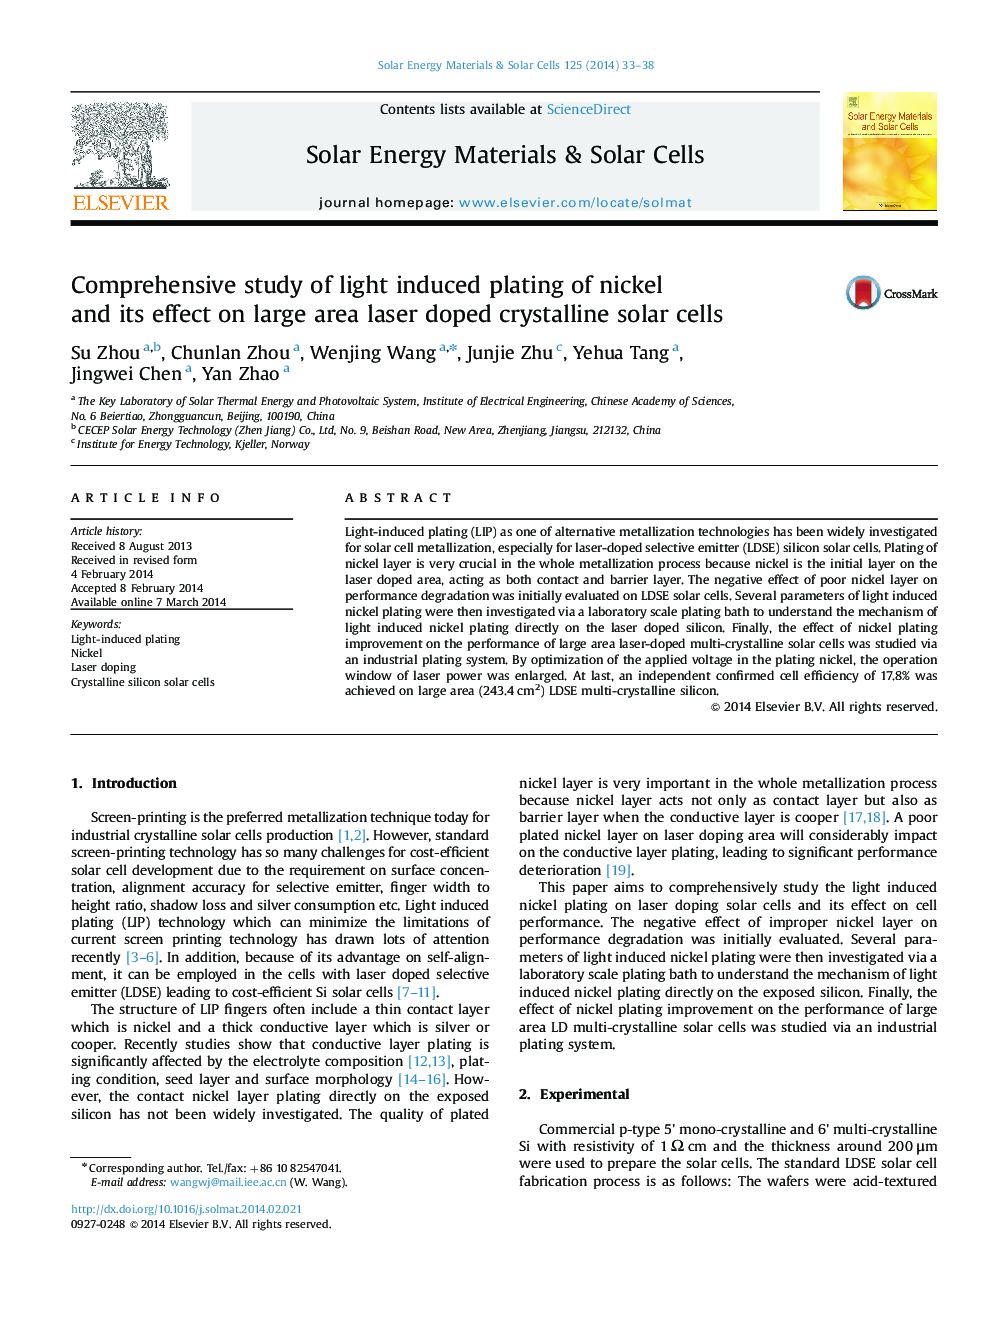 Comprehensive study of light induced plating of nickel and its effect on large area laser doped crystalline solar cells